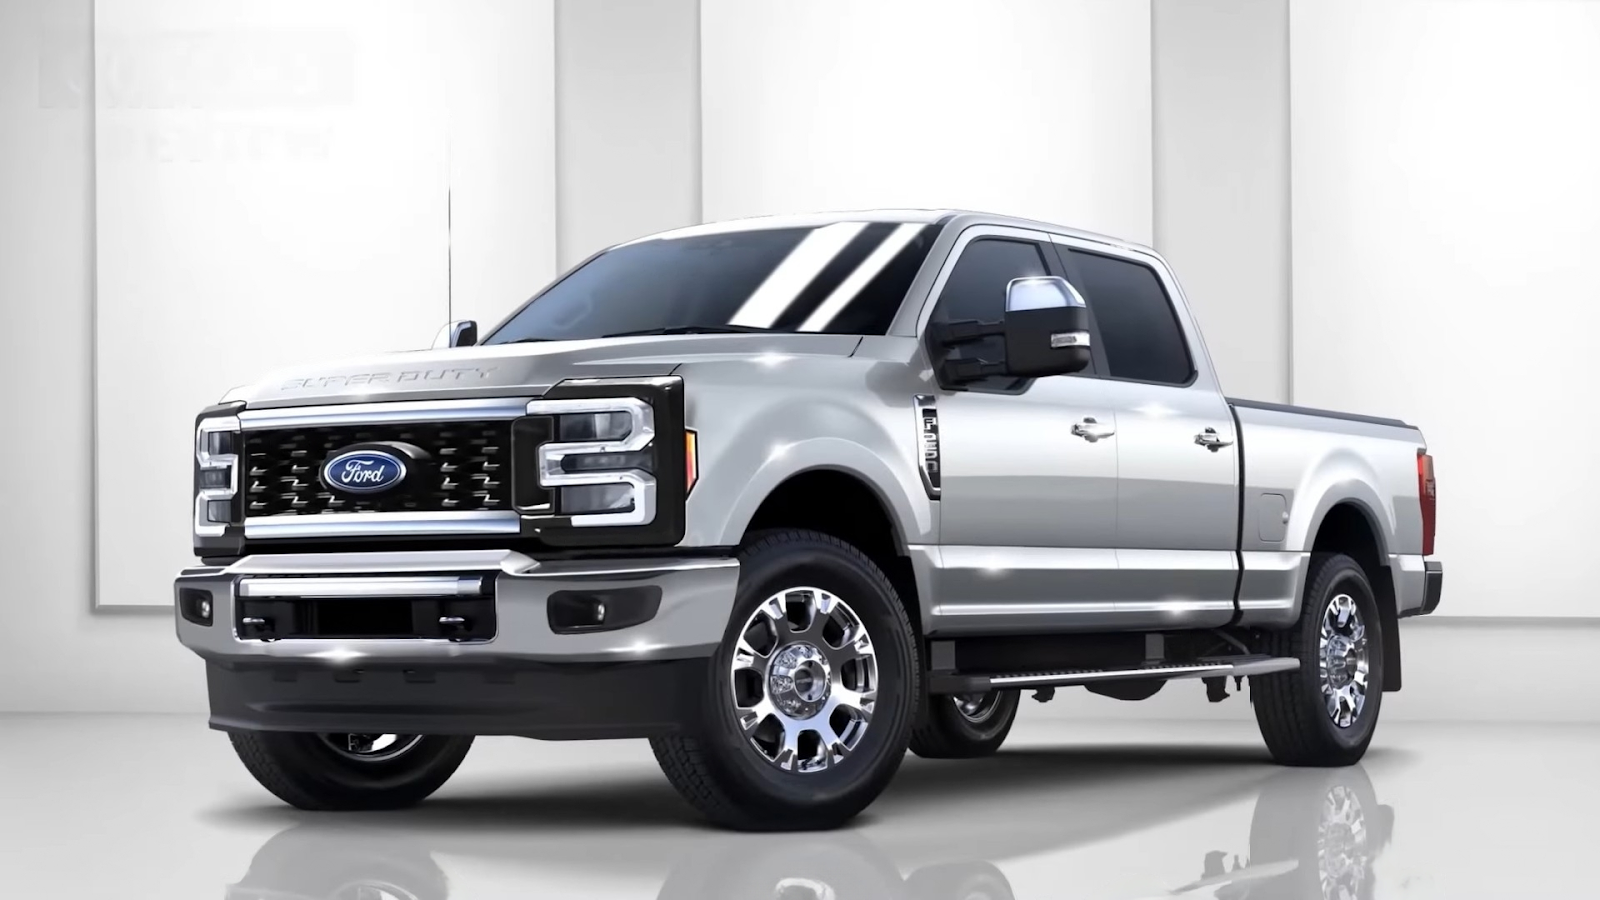 2025 Ford Super Duty: Release Date, Price And Performance